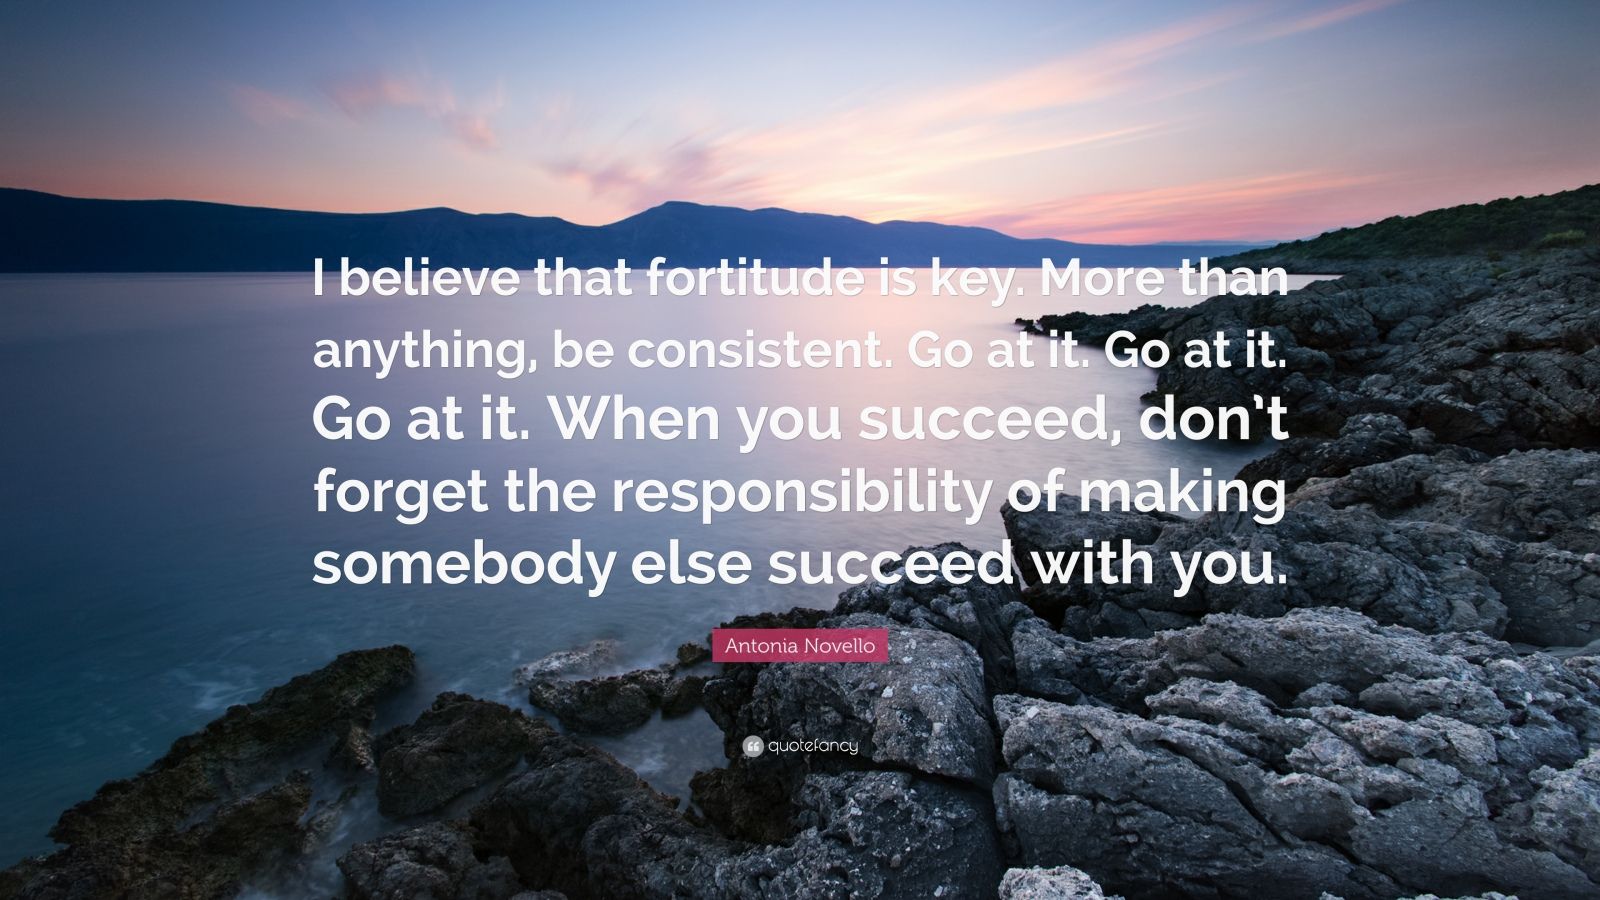 Antonia Novello Quote: "I believe that fortitude is key. More than anything, be consistent. Go ...